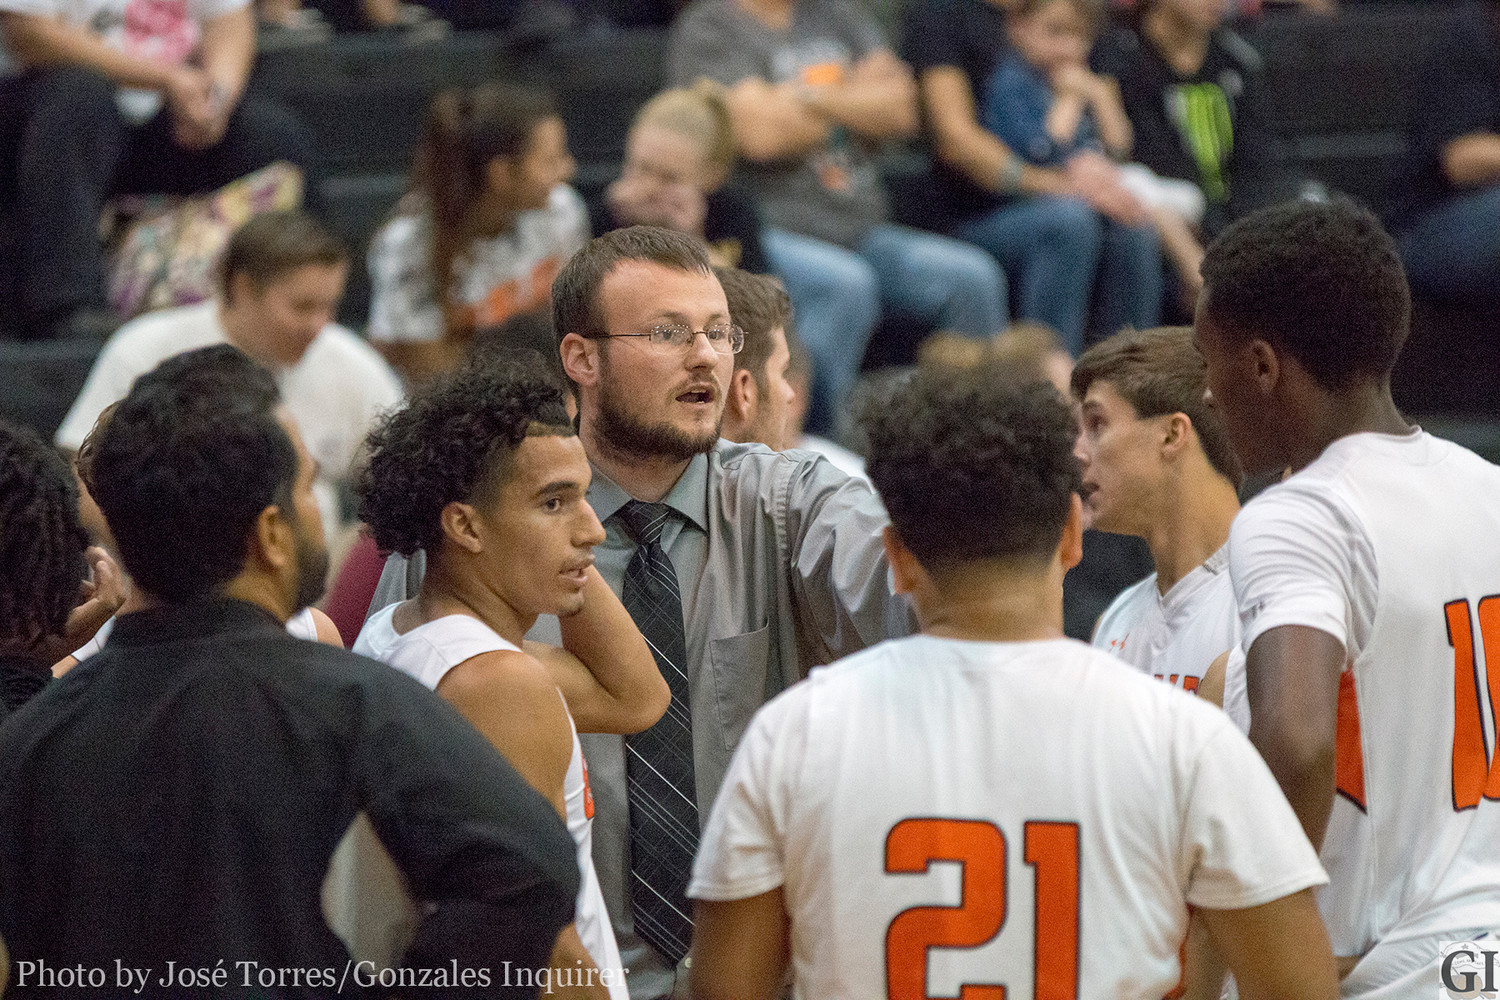 Head Coach A.J. Irwin believes it’ll be a process, but the first-year coach is ready to get his team looking like the Running Apaches of old.